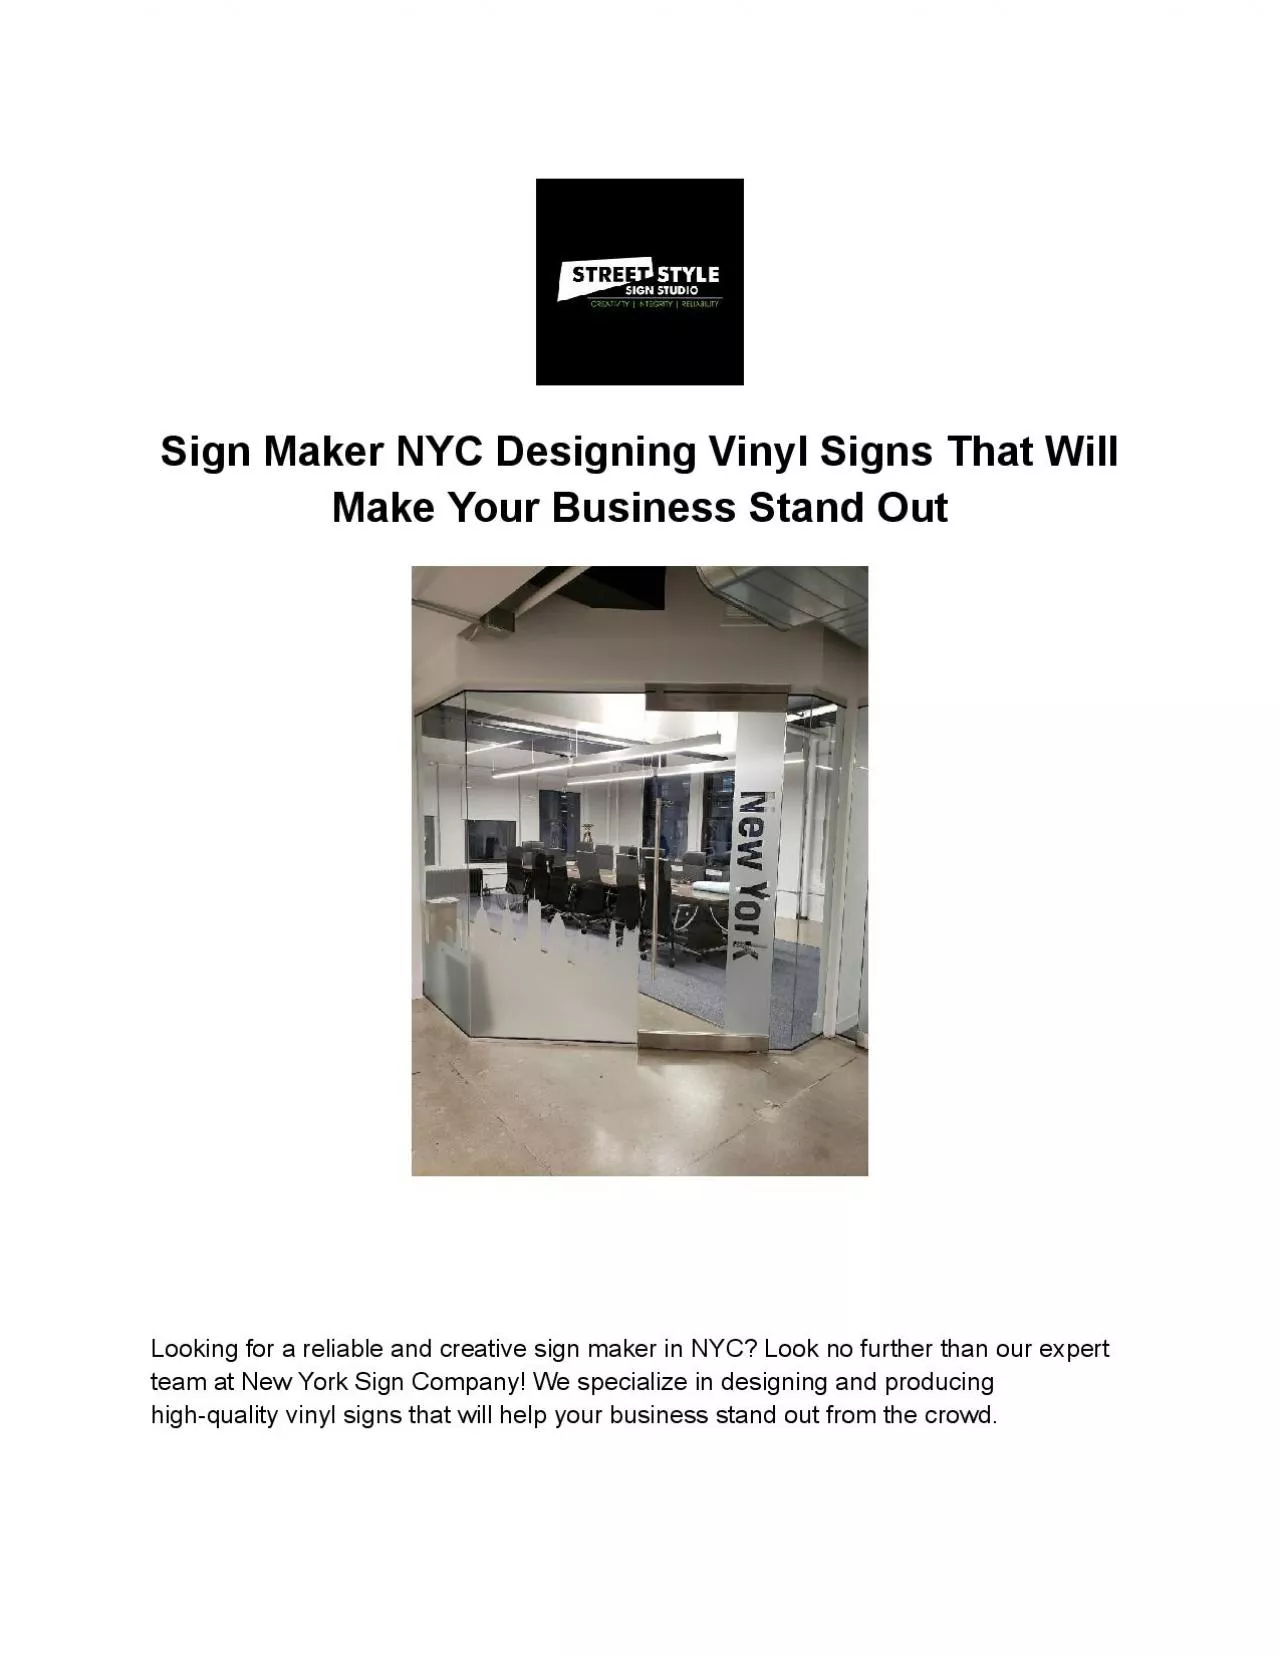 Sign Maker NYC Designing Vinyl Signs That Will Make Your Business Stand Out